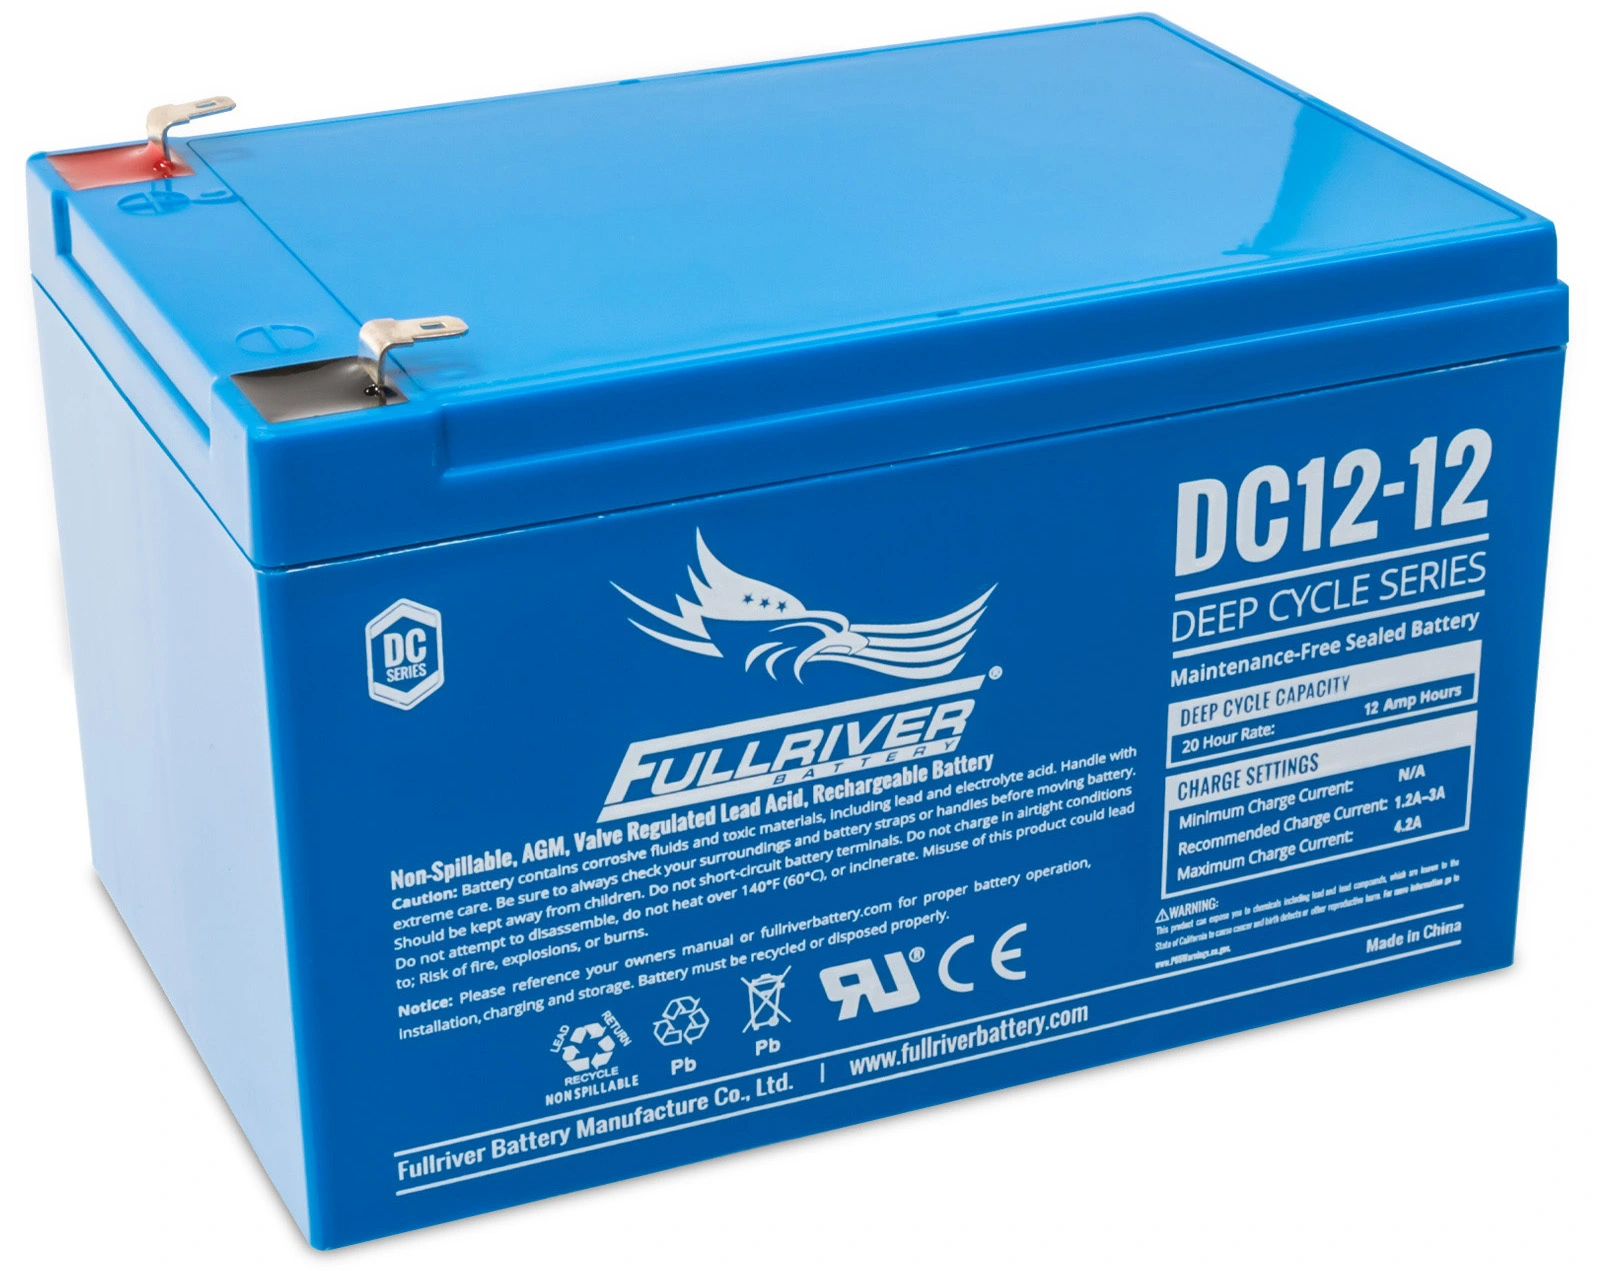 DC Series DC12-12 AGM battery from Fullriver Battery